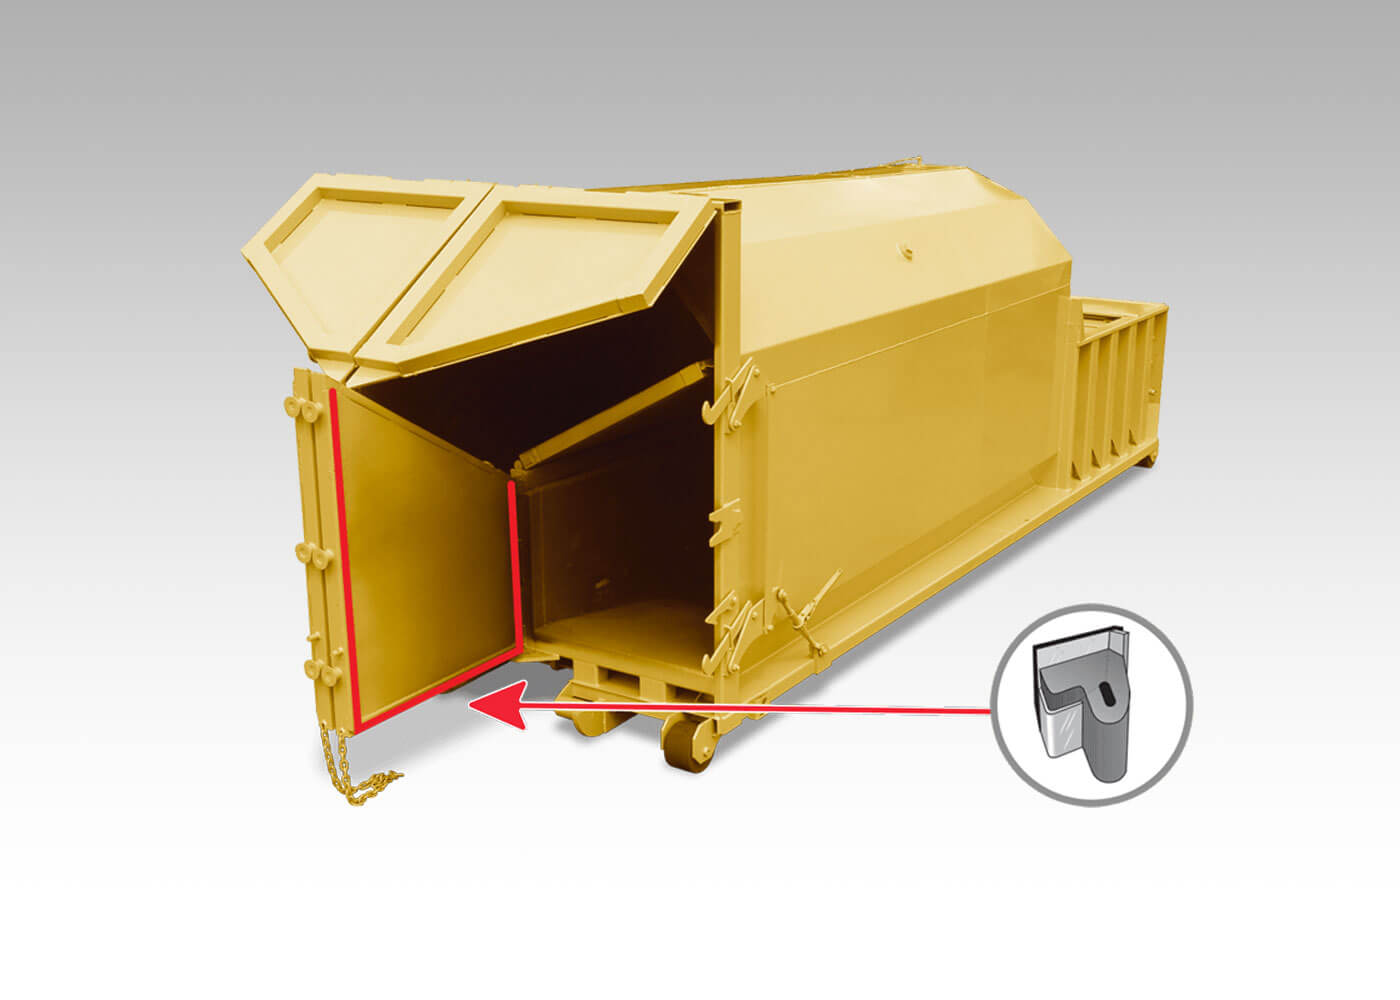 Dual compartment self contained trash compactor with two sections and sealed rear door